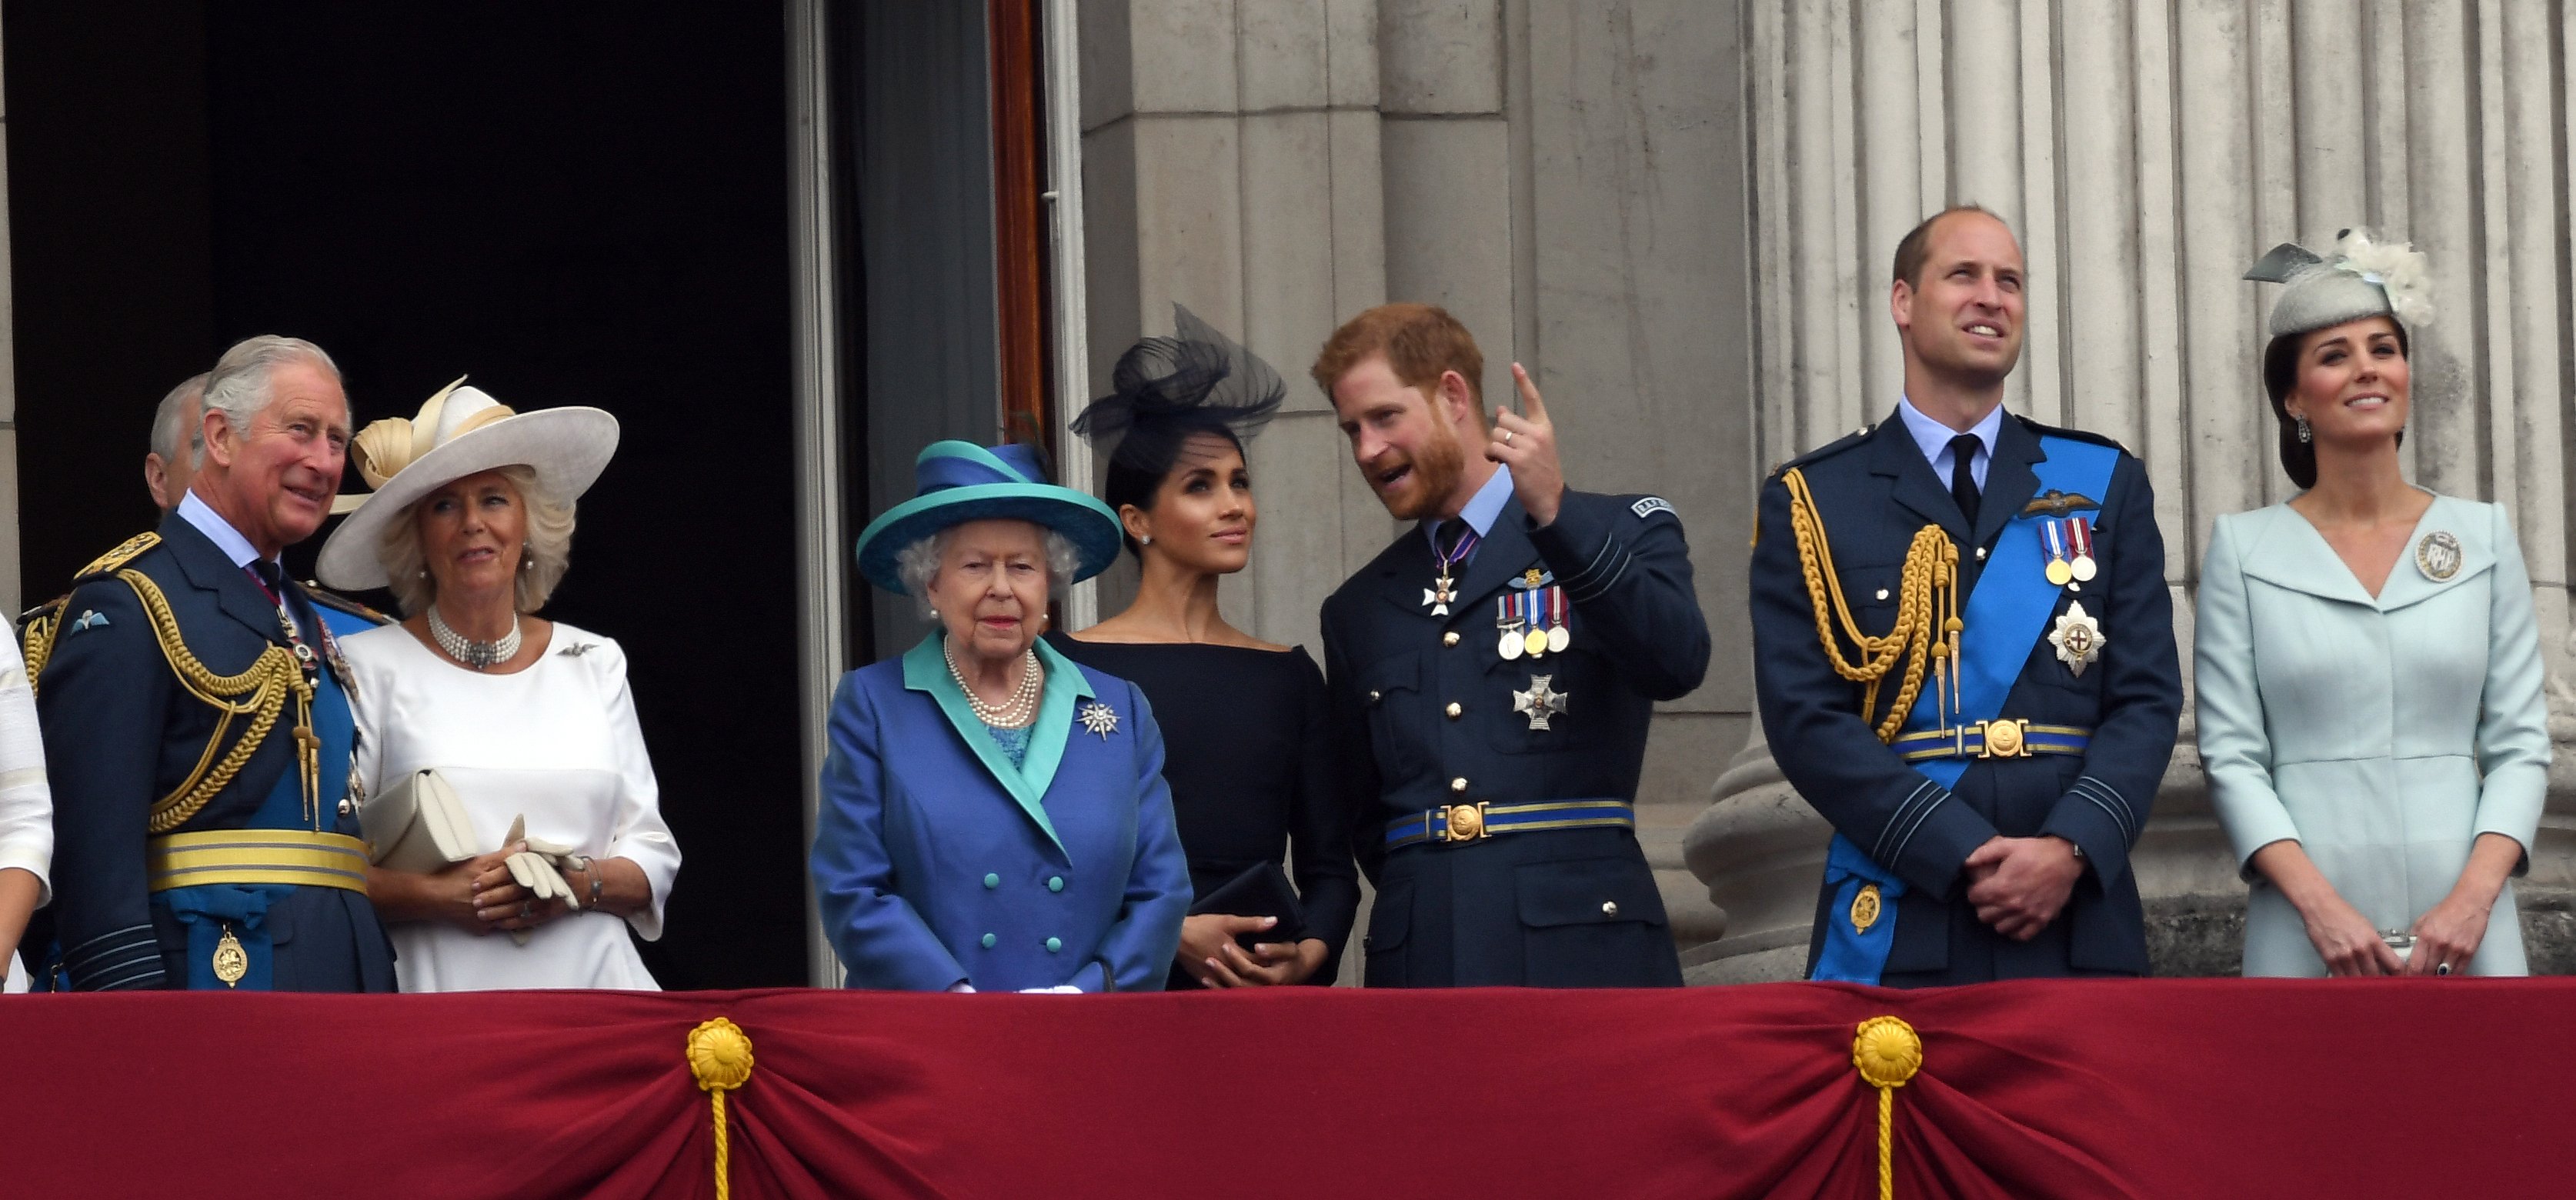 Prince Charles, Duchess Camilla, Queen Elizabeth ll, Duchess Meghan, Prince Harry, Prince William, and Duchess Kate on the balcony of Buckingham Palace to view a flypast to mark the centenary of the Royal Air Force (RAF) on July 10, 2018, in London, England | Source: Getty Images